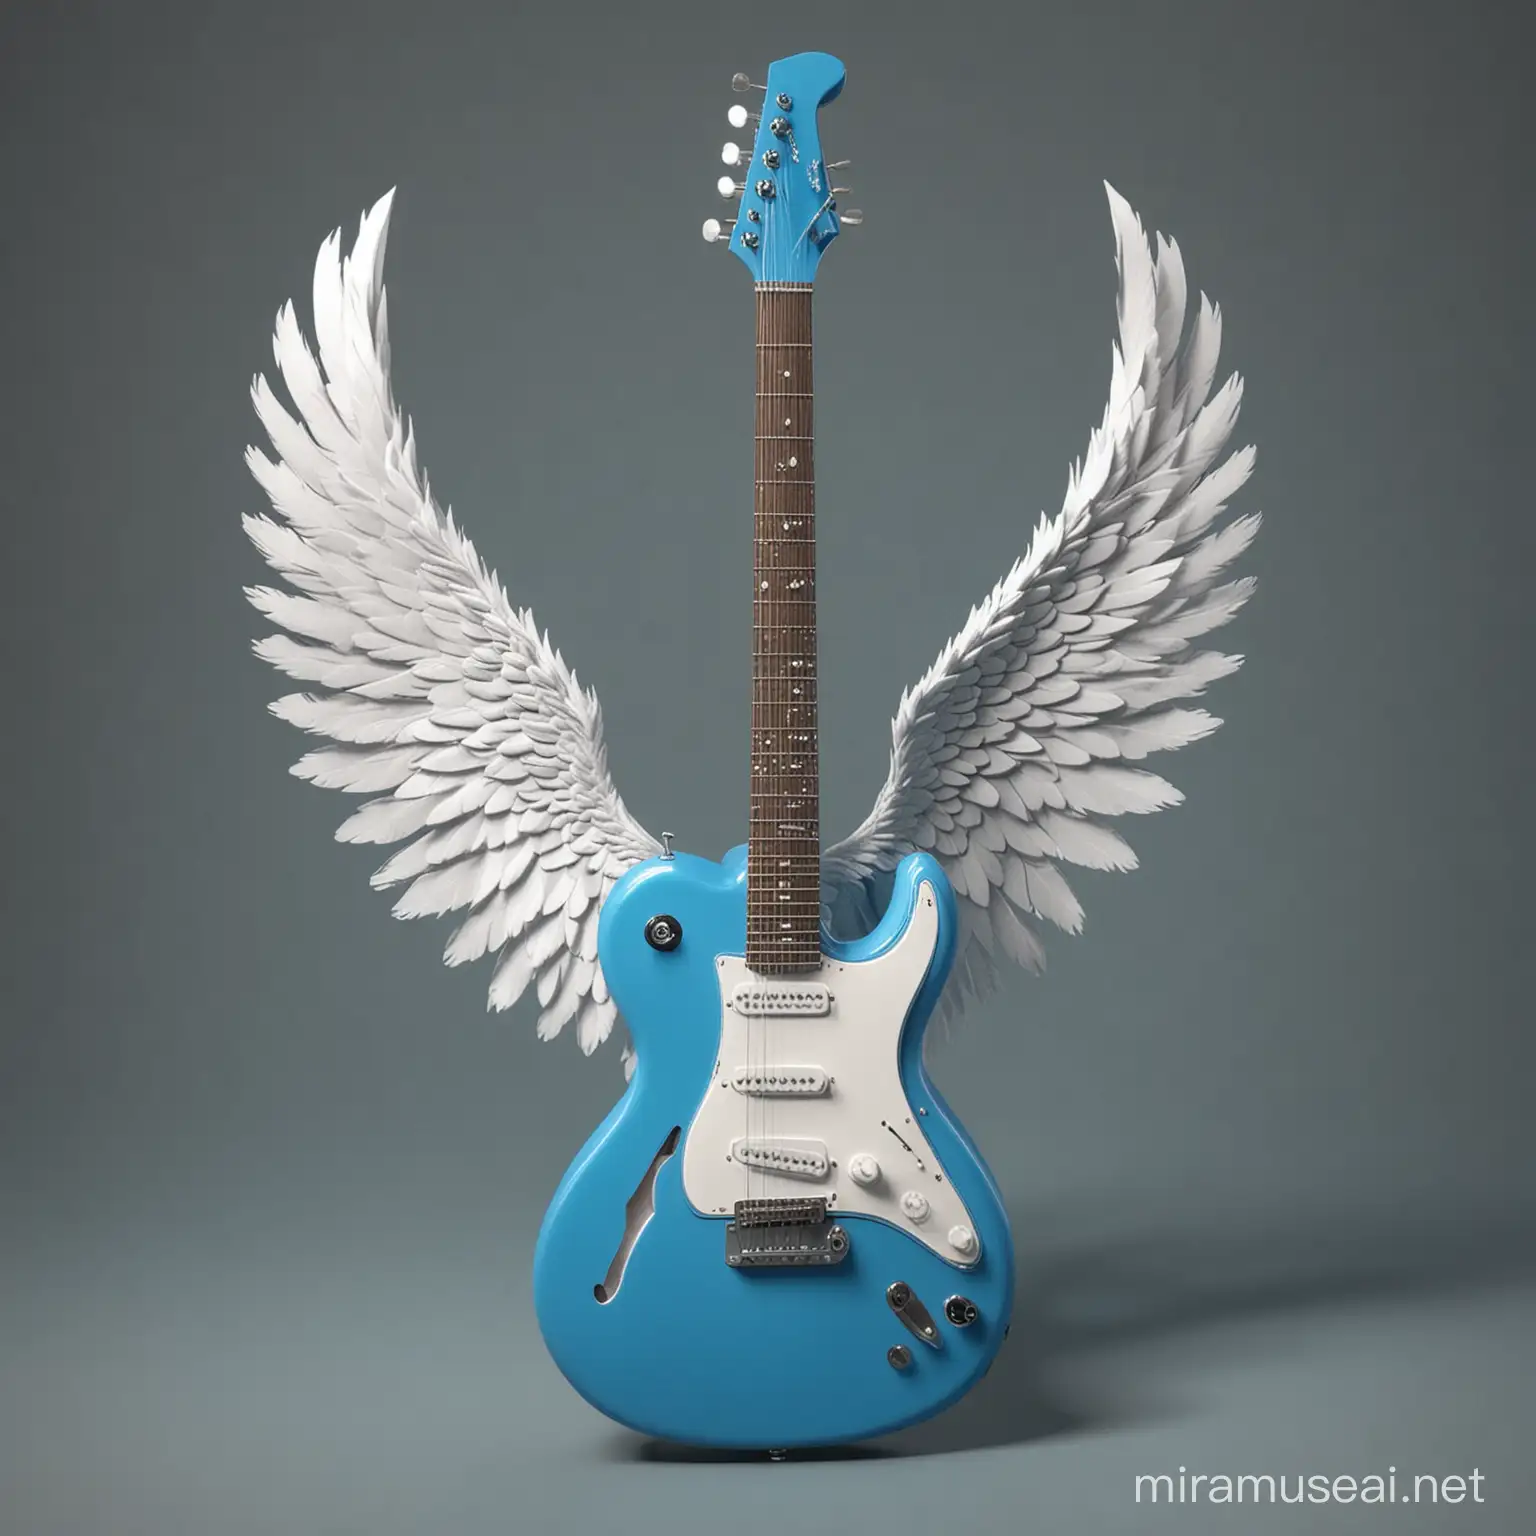 Ethereal White Wings and a Blue Guitar in 3D Art